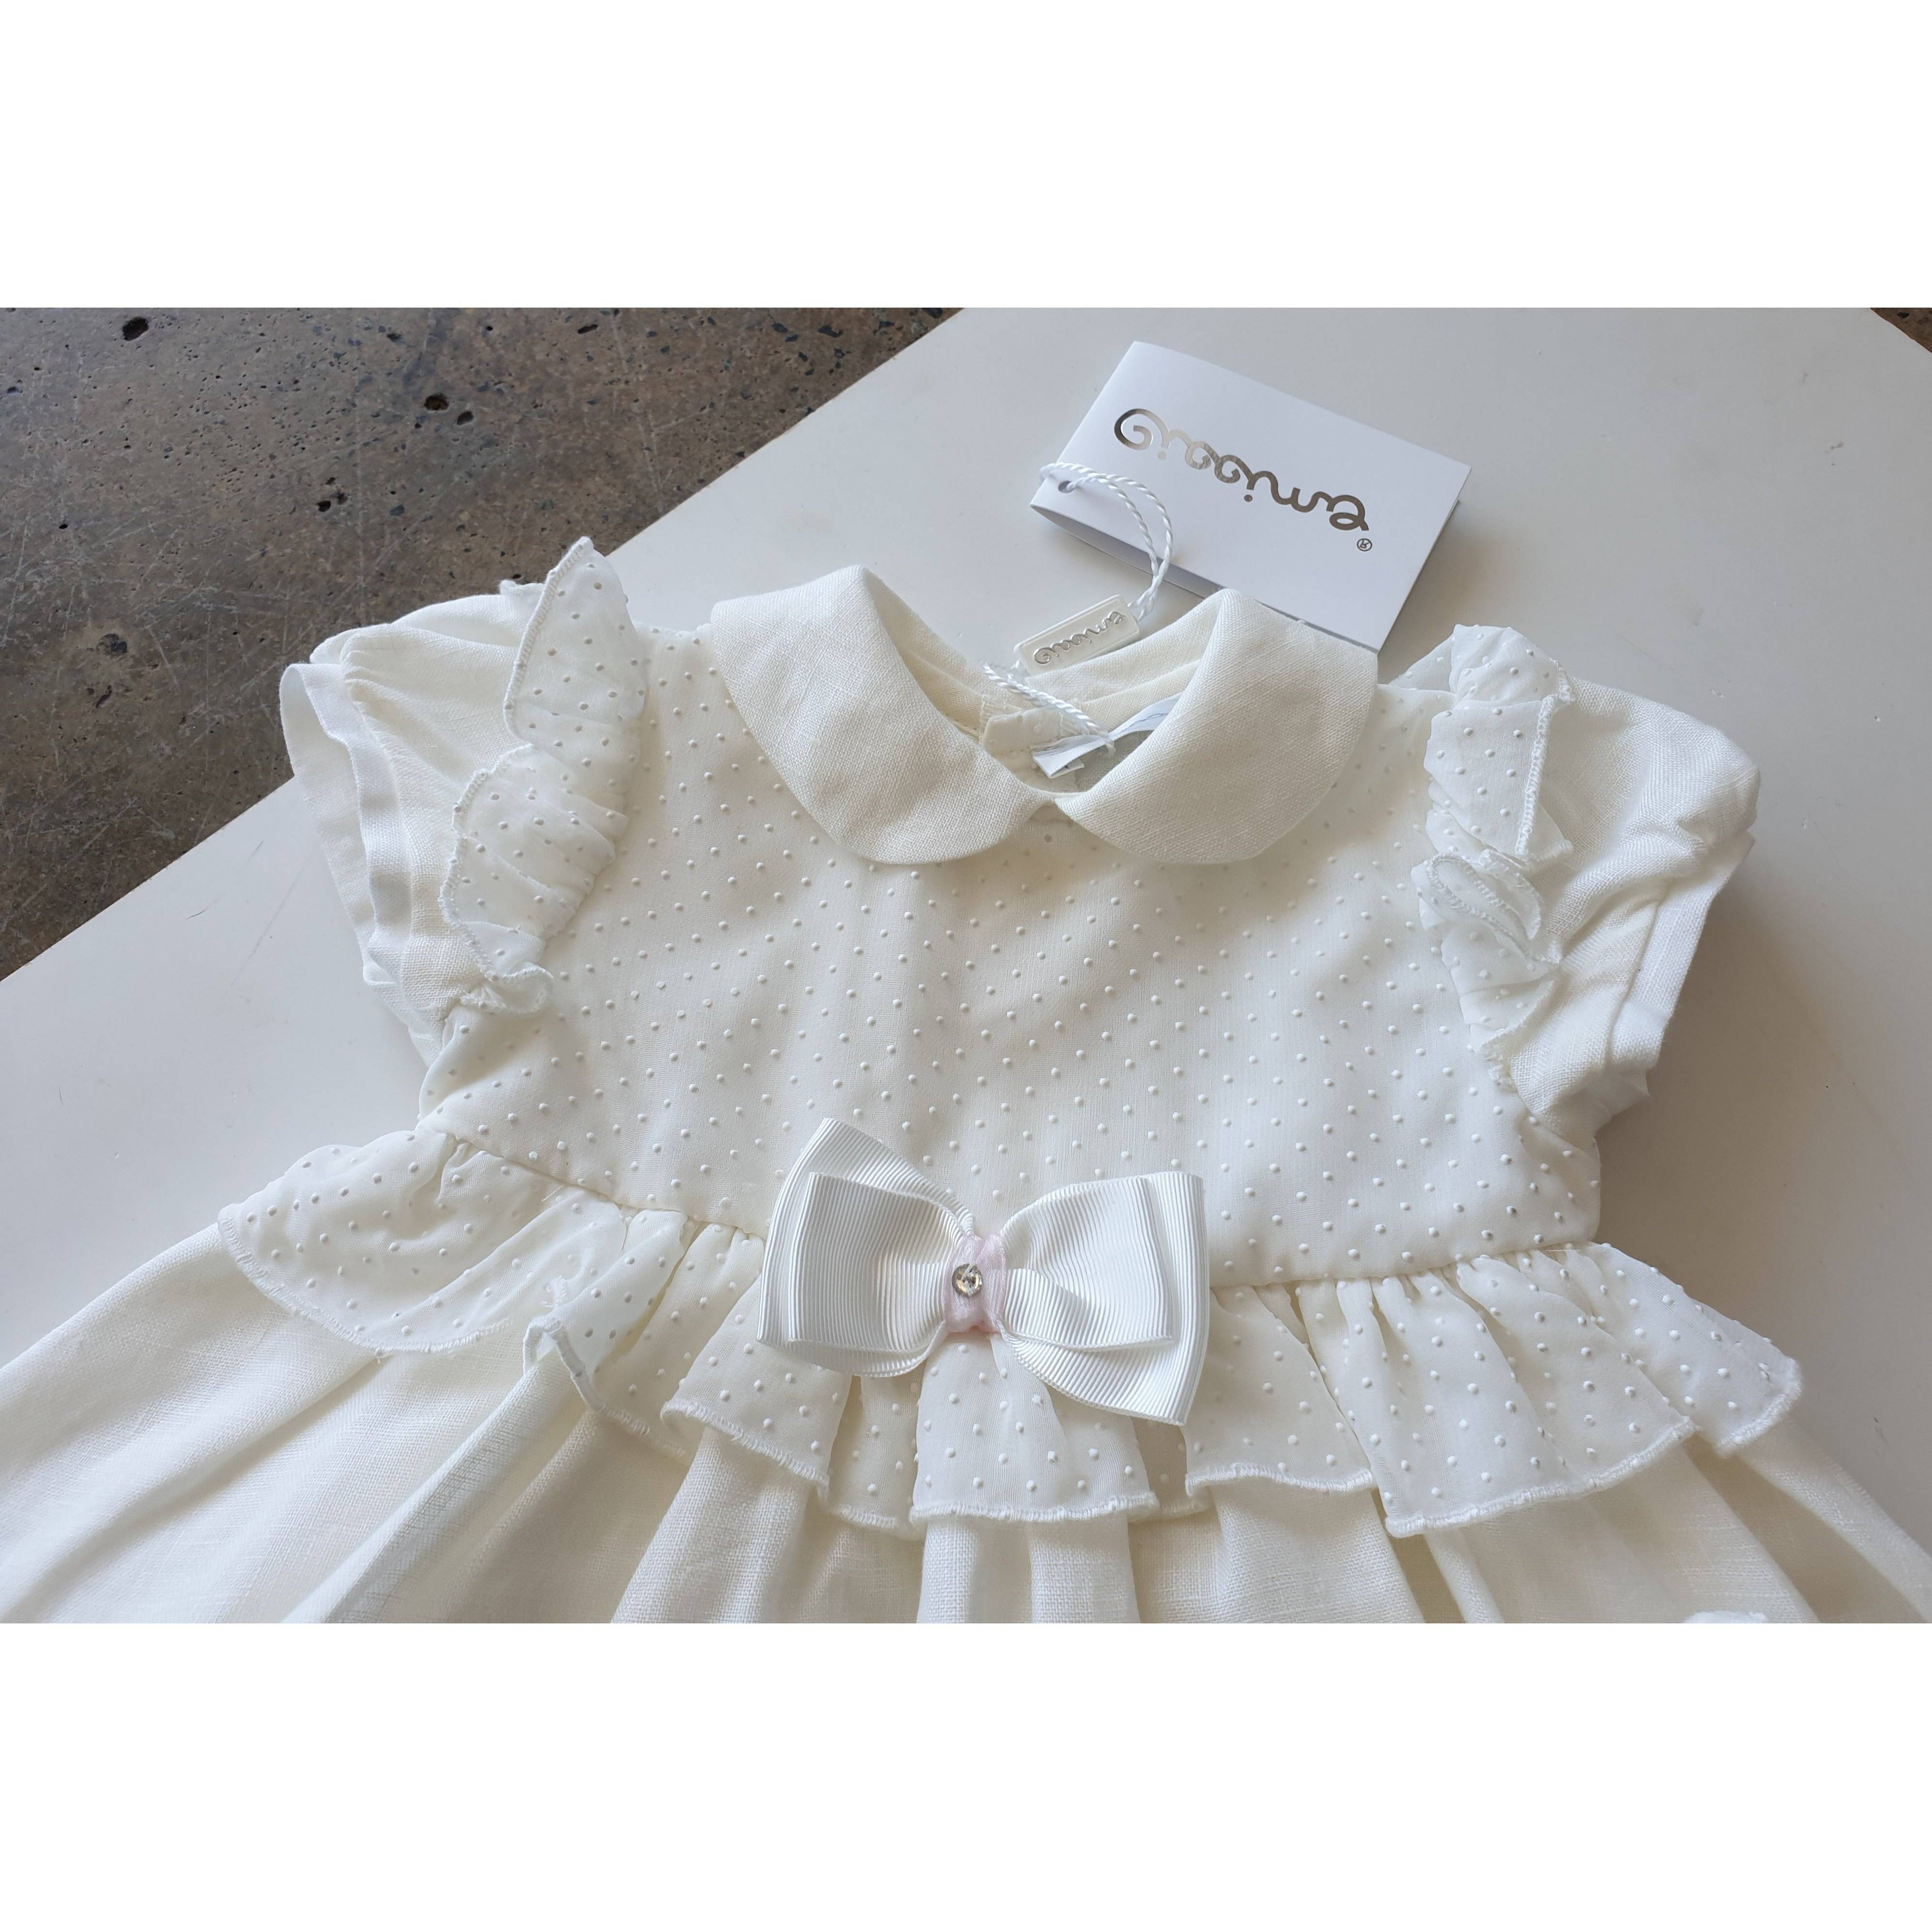 ROSEMARY BABY GIRL DRESS AND BLOOMERS